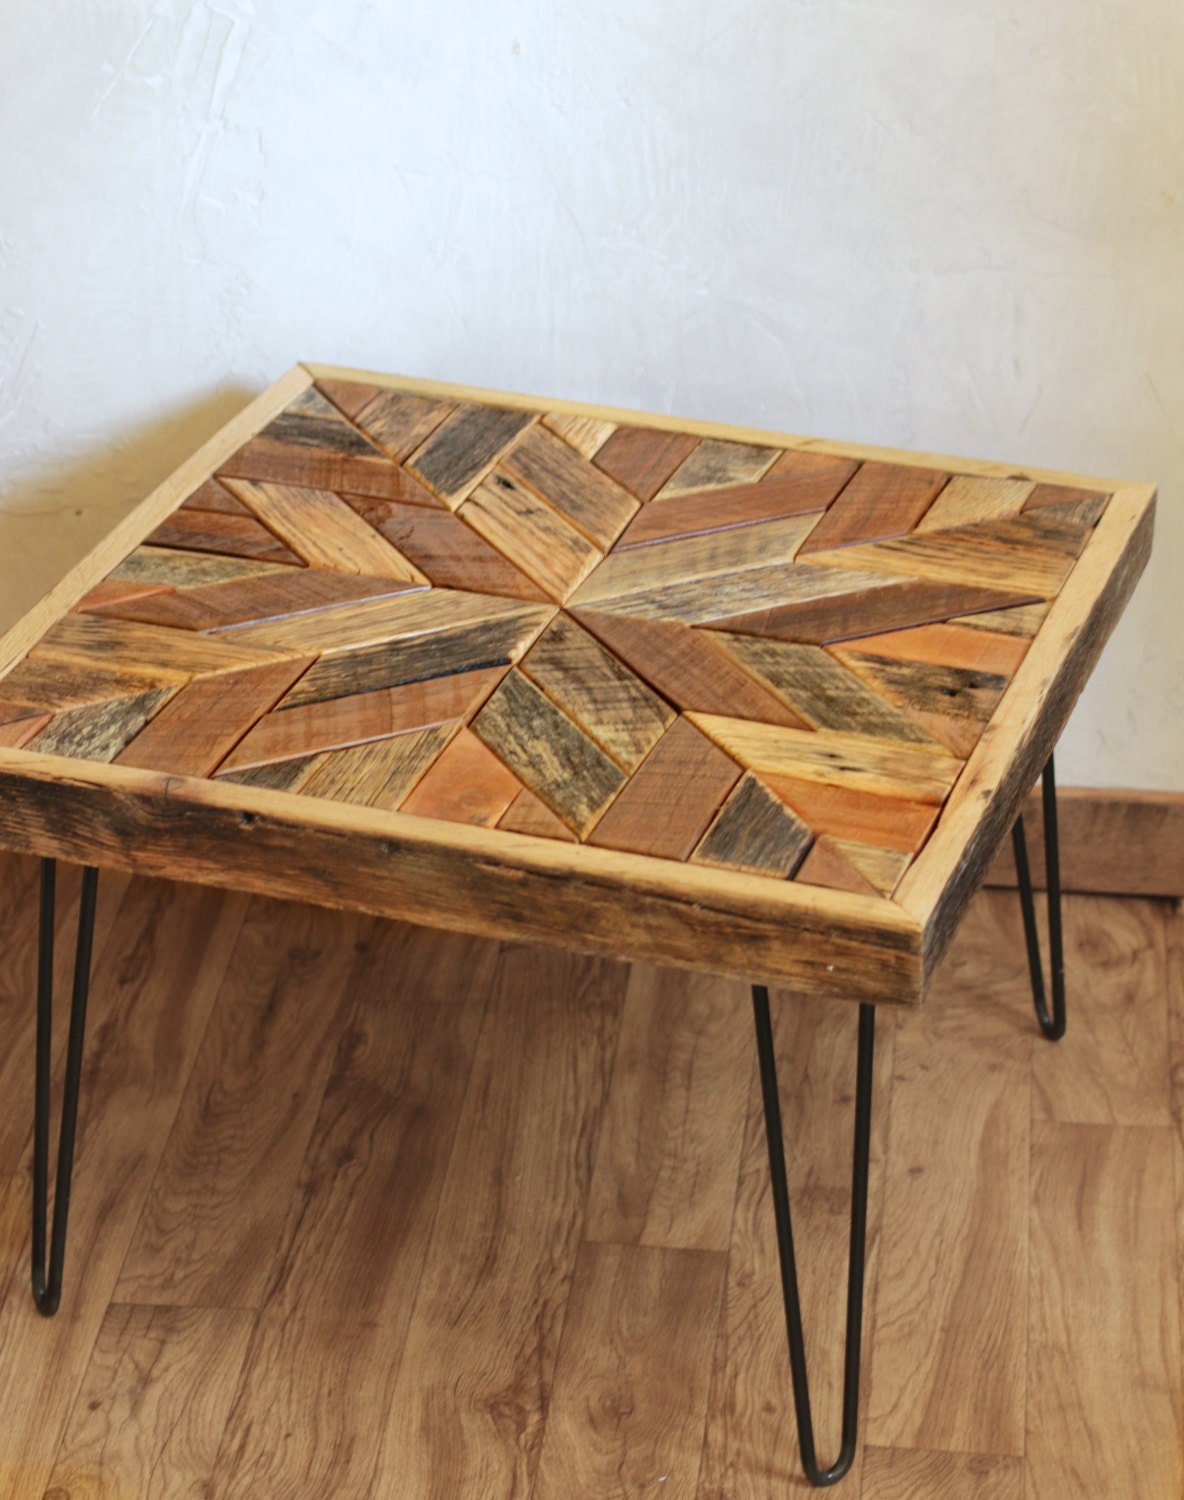 Woodworking patterns for tables